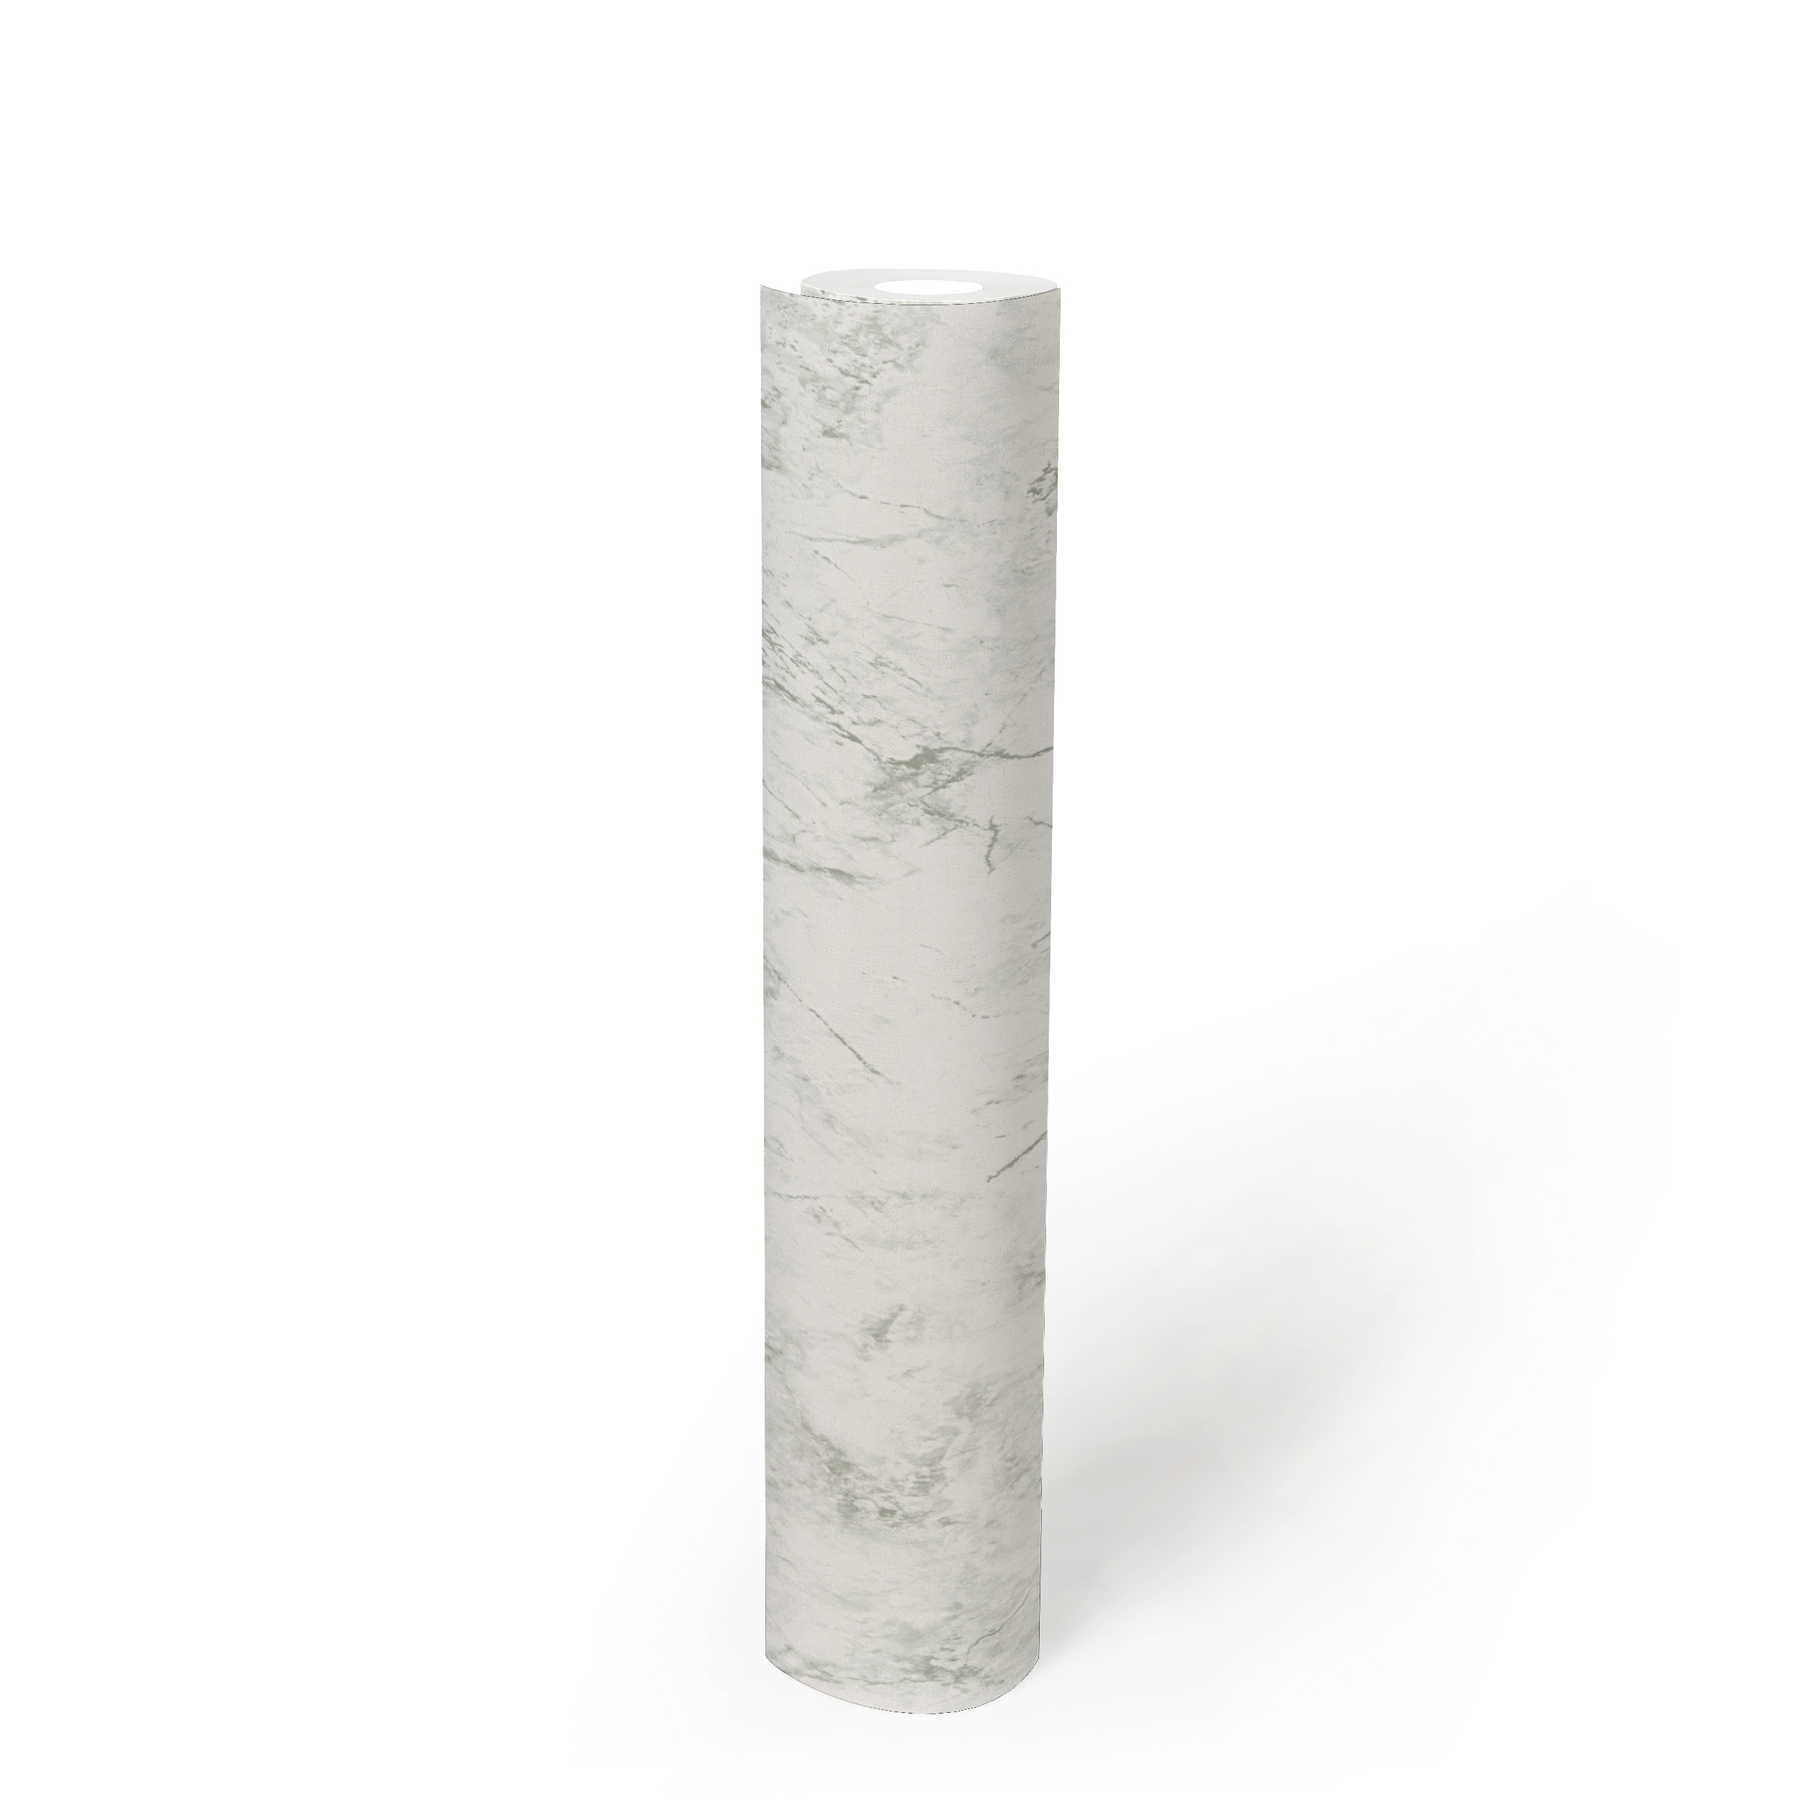             Non-woven wallpaper with fine marble look - white, green-grey
        